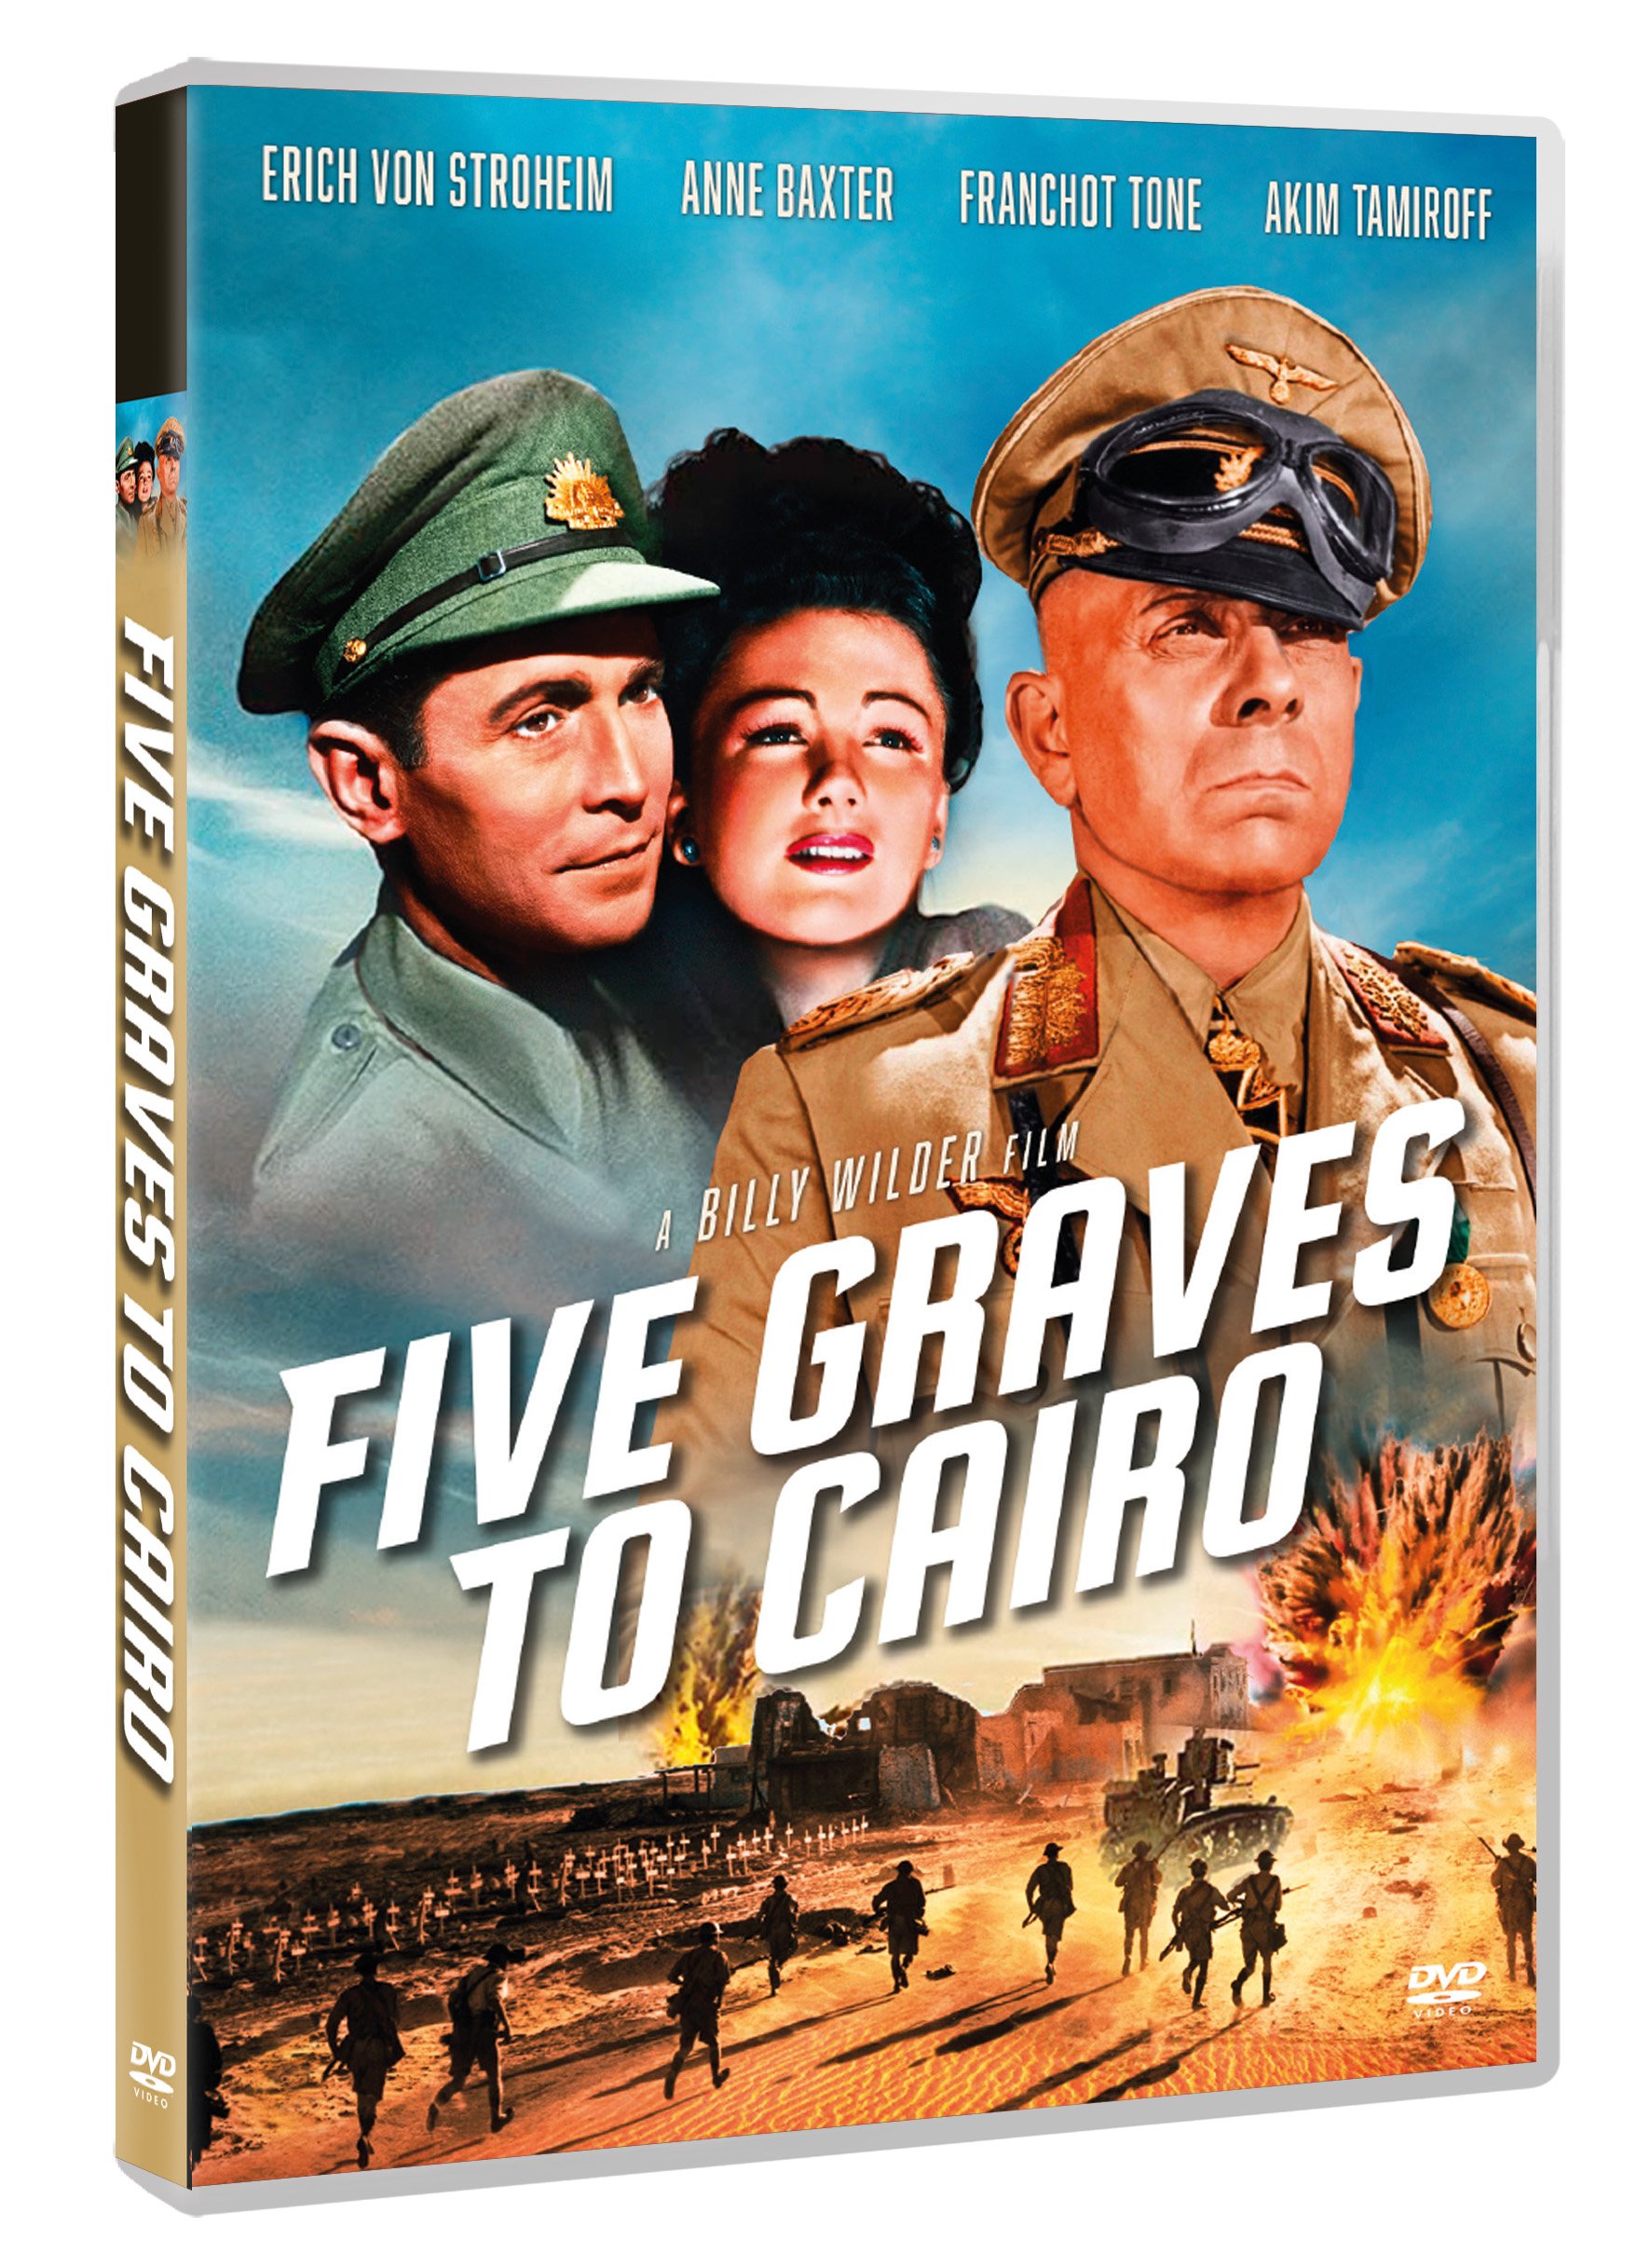 Five Graves to Cairo